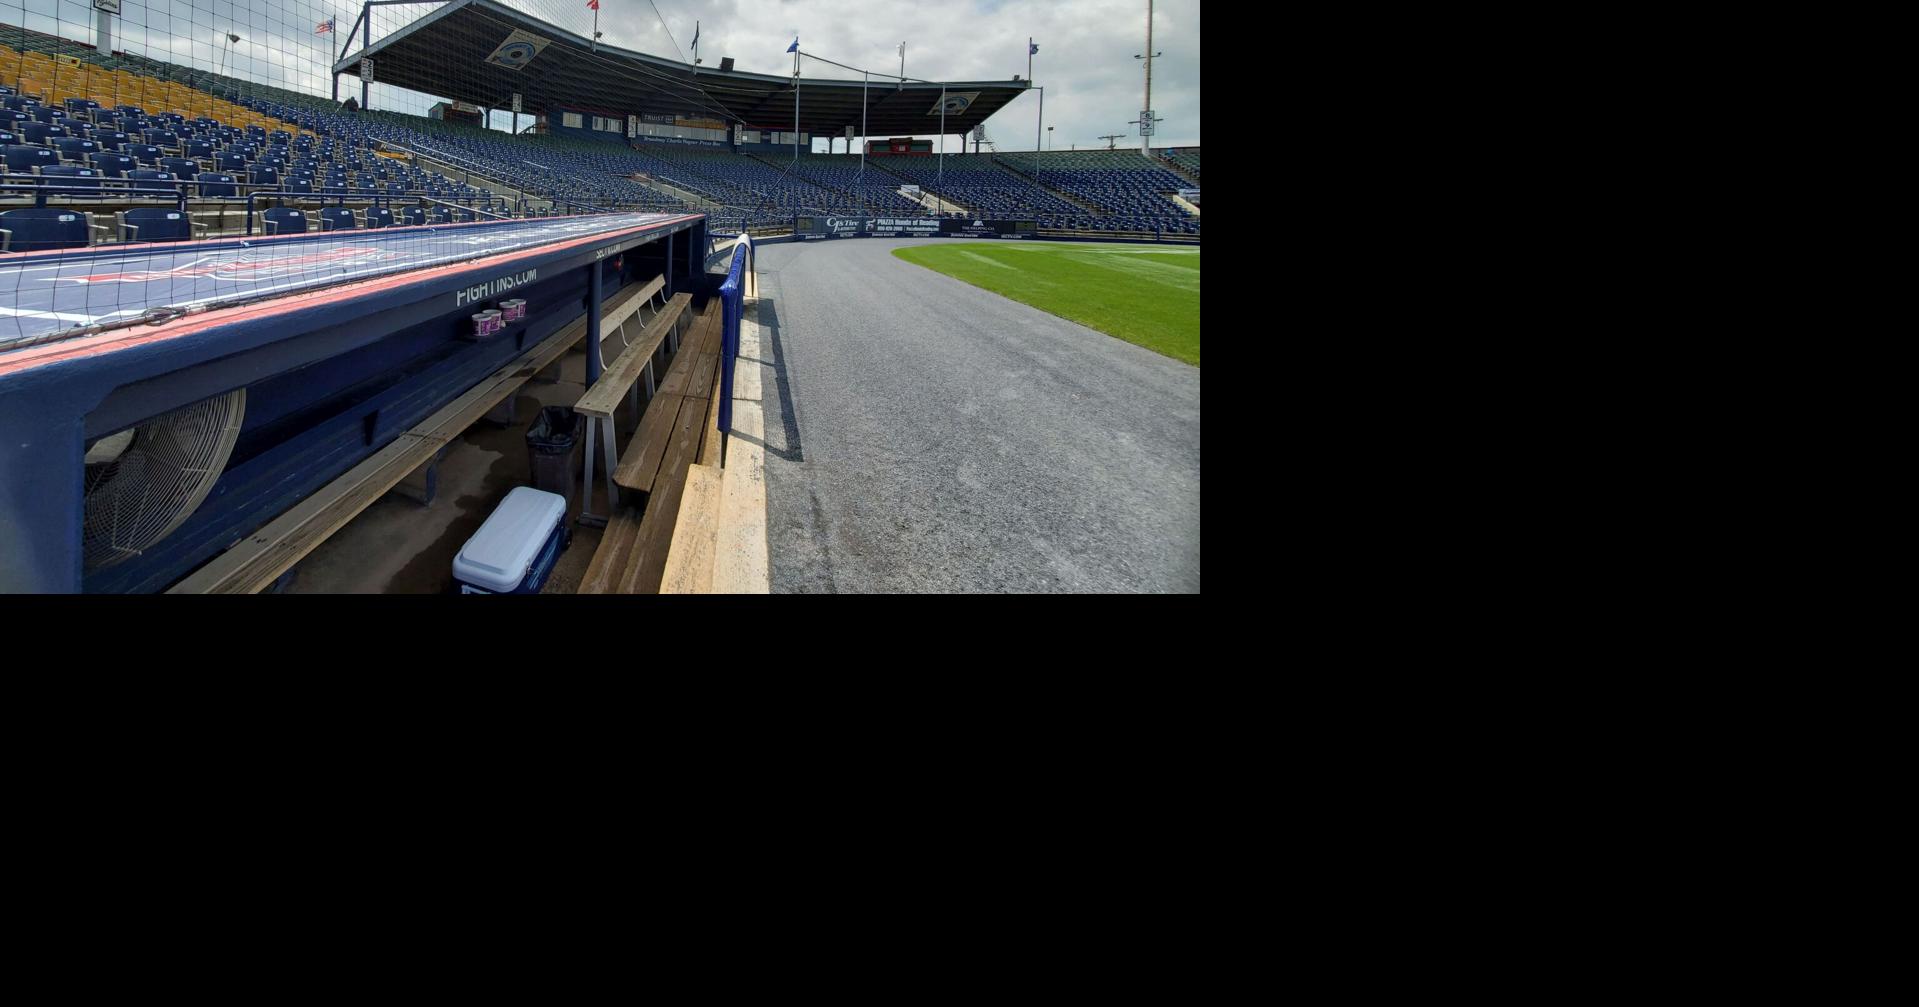 Ballpark upgrades needed to keep Reading Fightin Phils in town